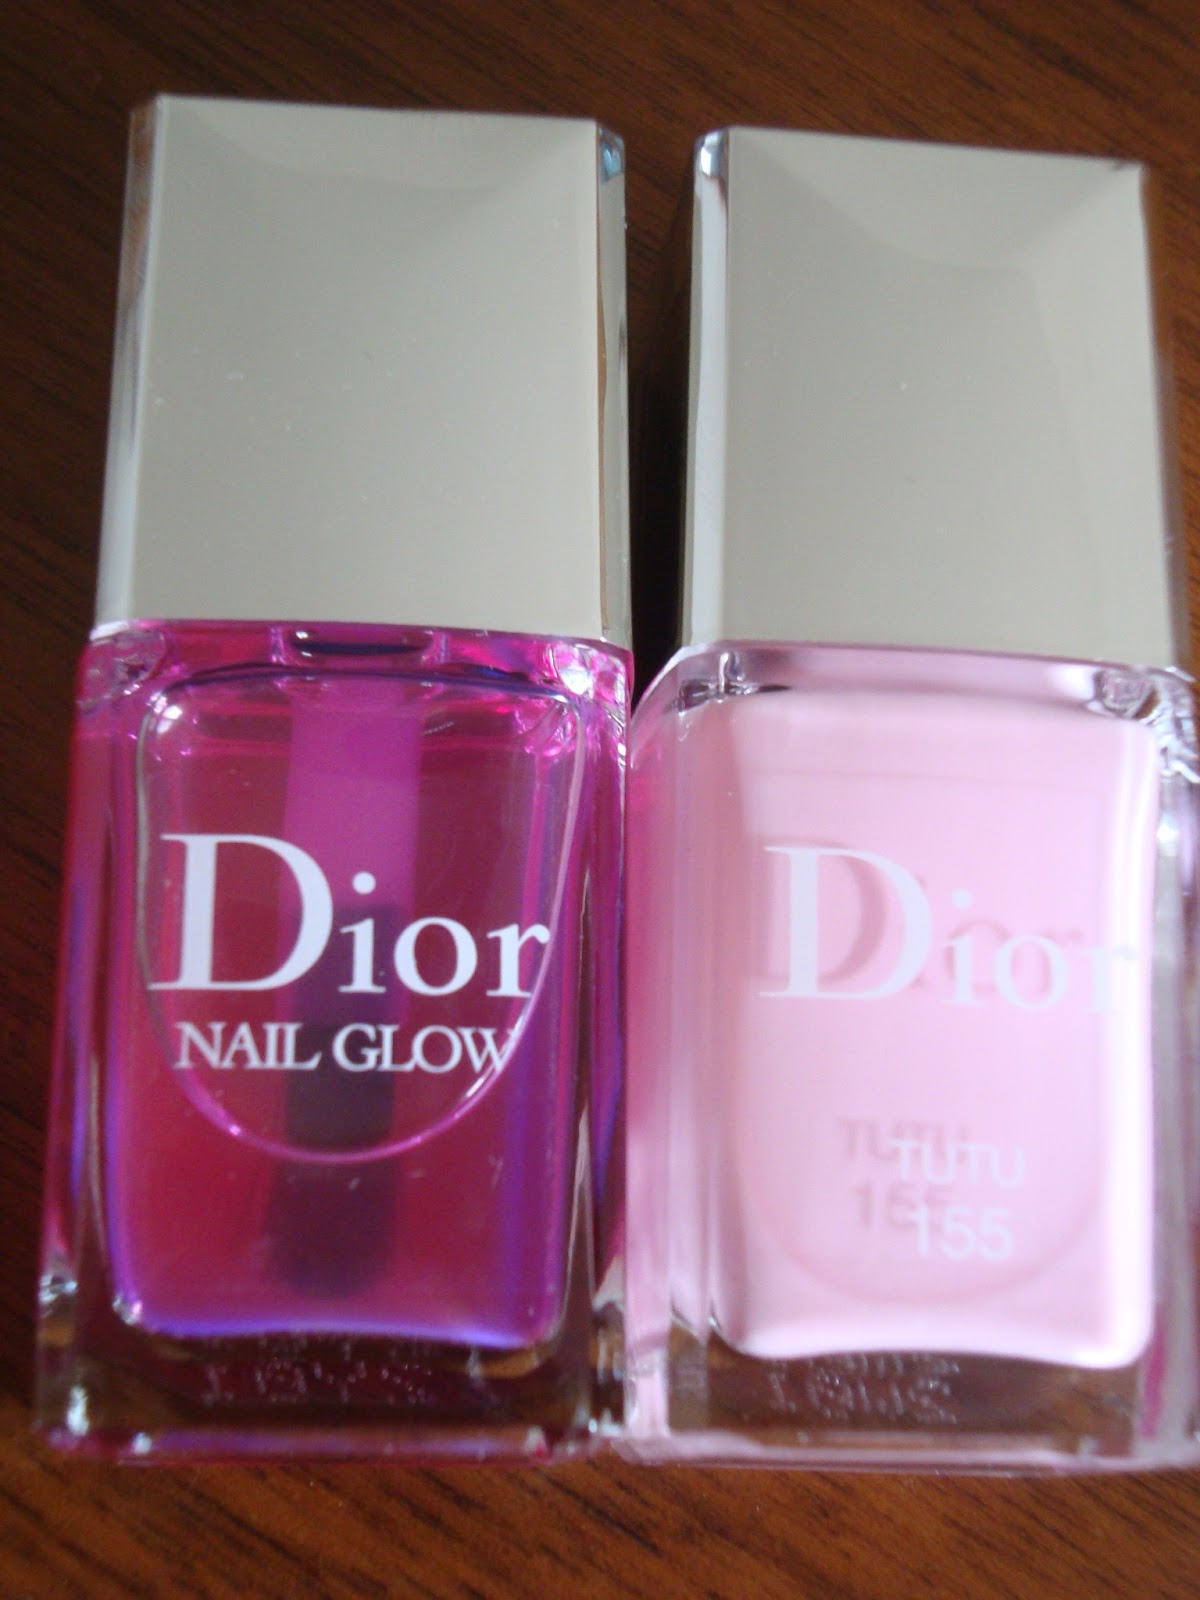 Dior's New Cherie Bow Vernis Nail Polishes in Gris Trianon and